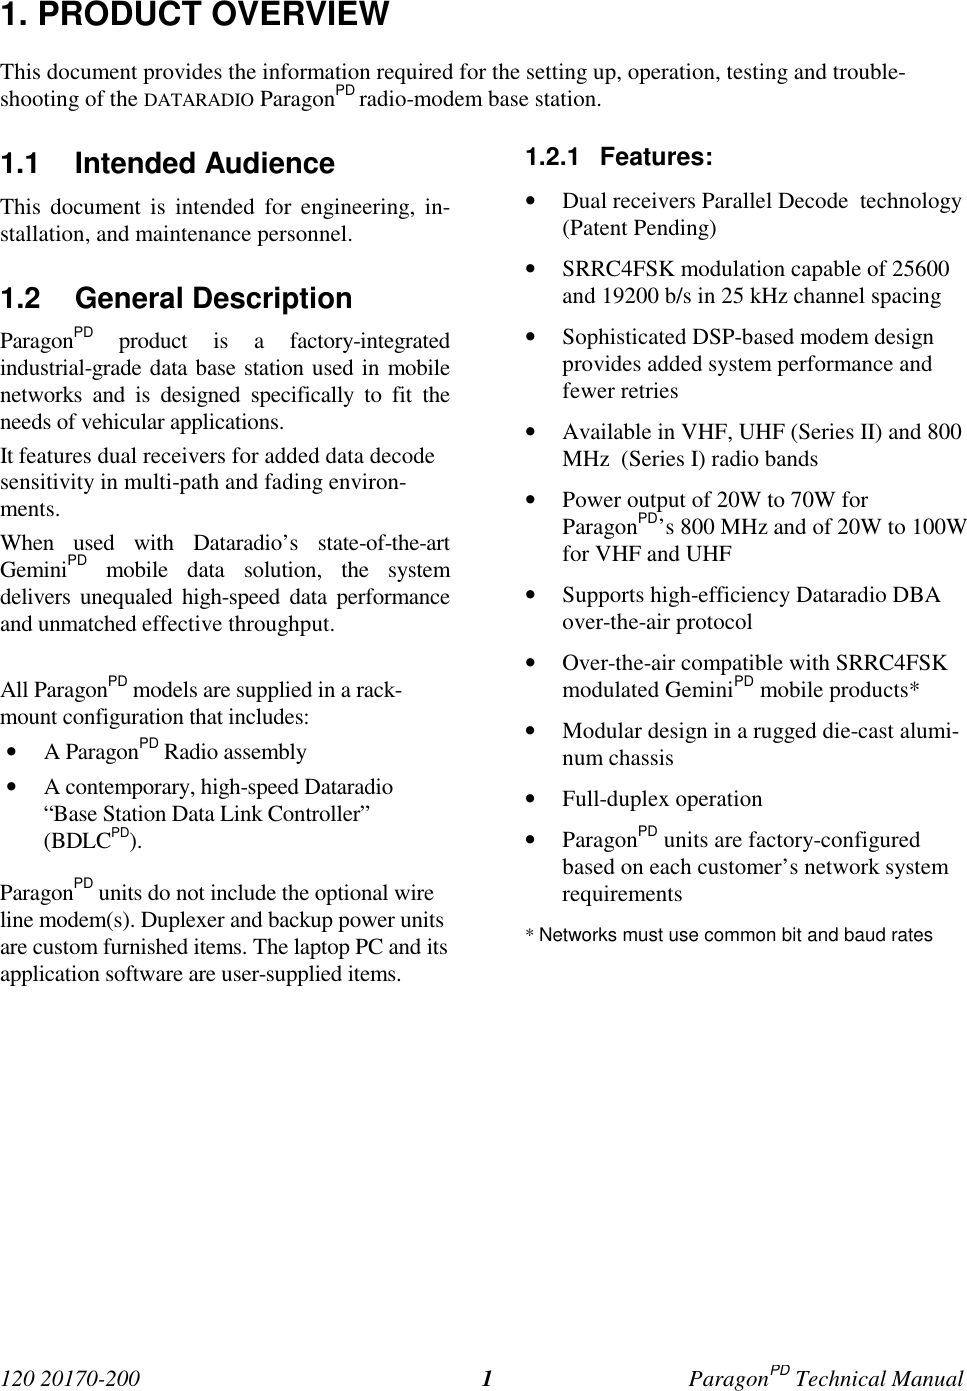 120 20170-200 ParagonPD Technical Manual11. PRODUCT OVERVIEWThis document provides the information required for the setting up, operation, testing and trouble-shooting of the DATARADIO ParagonPD radio-modem base station.1.1 Intended AudienceThis document is intended for engineering, in-stallation, and maintenance personnel.1.2 General DescriptionParagonPD product is a factory-integratedindustrial-grade data base station used in mobilenetworks and is designed specifically to fit theneeds of vehicular applications.It features dual receivers for added data decodesensitivity in multi-path and fading environ-ments.When used with Dataradio’s state-of-the-artGeminiPD mobile data solution, the systemdelivers unequaled high-speed data performanceand unmatched effective throughput.All ParagonPD models are supplied in a rack-mount configuration that includes:• A ParagonPD Radio assembly• A contemporary, high-speed Dataradio“Base Station Data Link Controller”(BDLCPD).ParagonPD units do not include the optional wireline modem(s). Duplexer and backup power unitsare custom furnished items. The laptop PC and itsapplication software are user-supplied items.1.2.1 Features:• Dual receivers Parallel Decode  technology(Patent Pending)• SRRC4FSK modulation capable of 25600and 19200 b/s in 25 kHz channel spacing• Sophisticated DSP-based modem designprovides added system performance andfewer retries• Available in VHF, UHF (Series II) and 800MHz  (Series I) radio bands• Power output of 20W to 70W forParagonPD’s 800 MHz and of 20W to 100Wfor VHF and UHF• Supports high-efficiency Dataradio DBAover-the-air protocol• Over-the-air compatible with SRRC4FSKmodulated GeminiPD mobile products*• Modular design in a rugged die-cast alumi-num chassis• Full-duplex operation• ParagonPD units are factory-configuredbased on each customer’s network systemrequirements* Networks must use common bit and baud rates